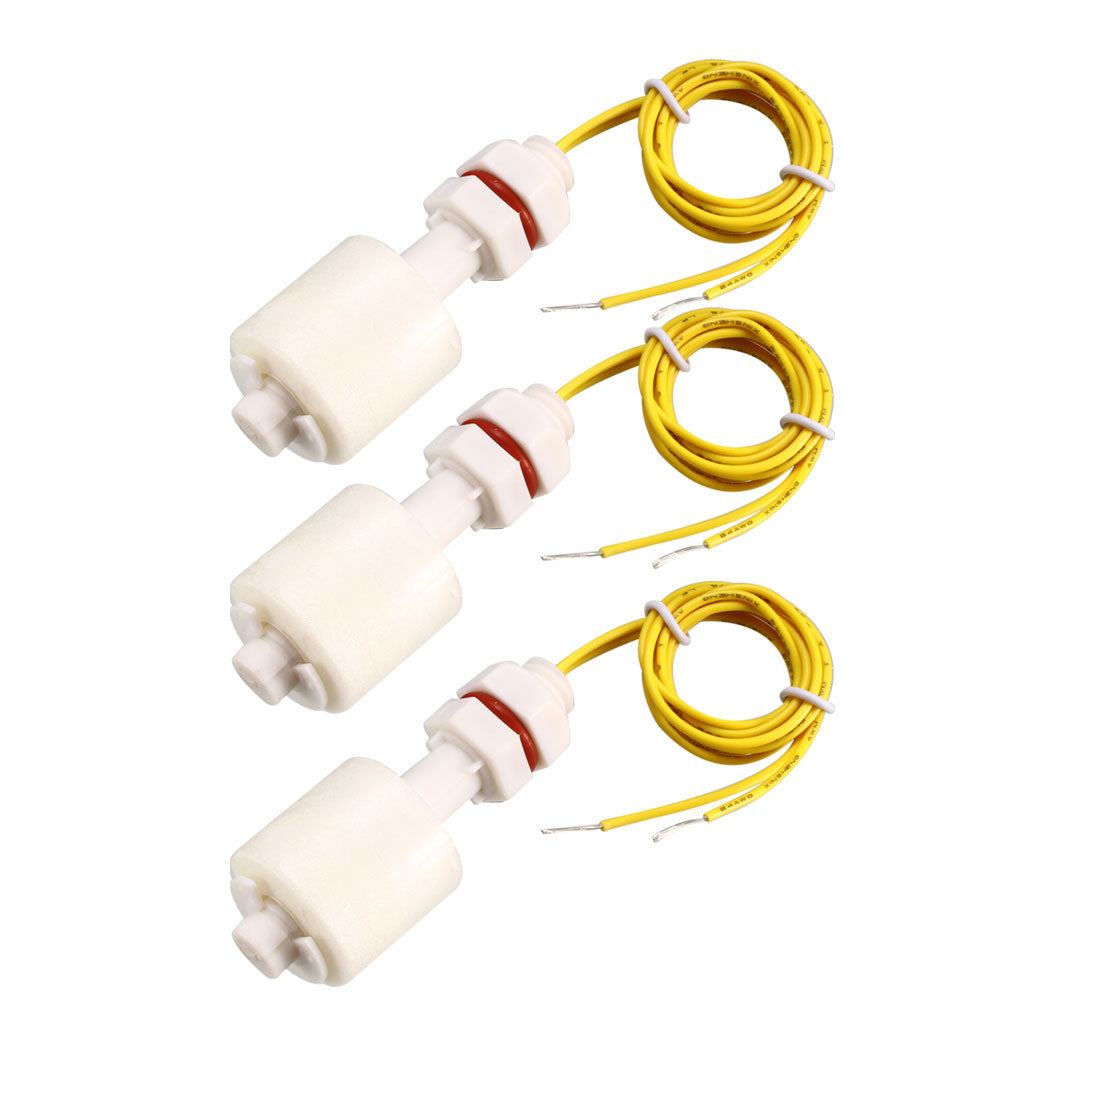 uxcell Uxcell 3pcs PP Float Switch M10 57mm Vertical Liquid Water Level Control Sensor Plastic White for Tank Pool